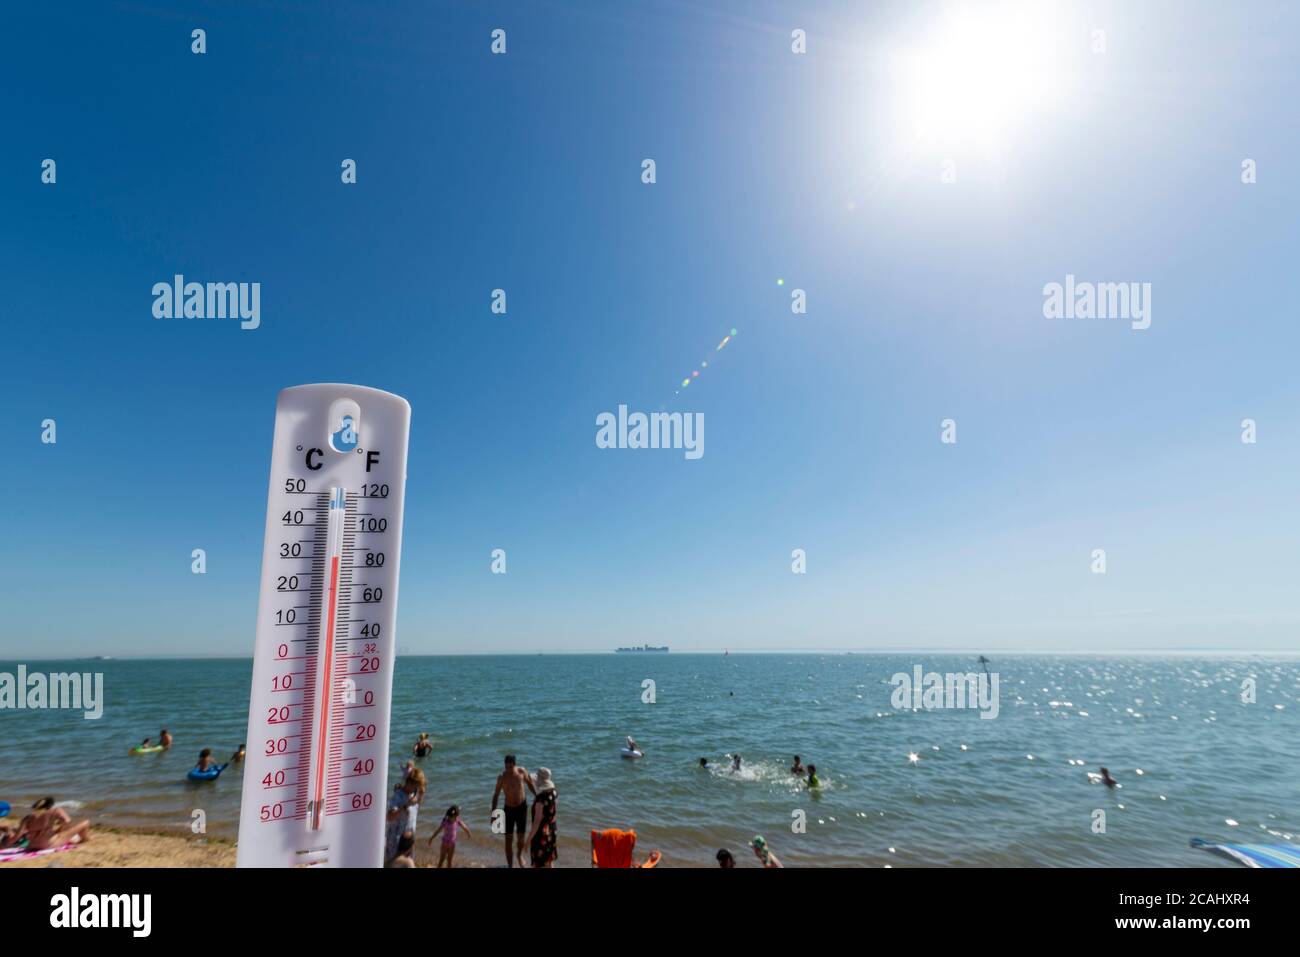 Southend on Sea, Essex, UK. 7th Aug, 2020. With the forecast high temperatures people are heading to the seafront to cool down, despite the COVID-19 Coronavirus advice. In Southend on Sea people are out enjoying the afternoon high tide, with temperatures into the low thirties Stock Photo